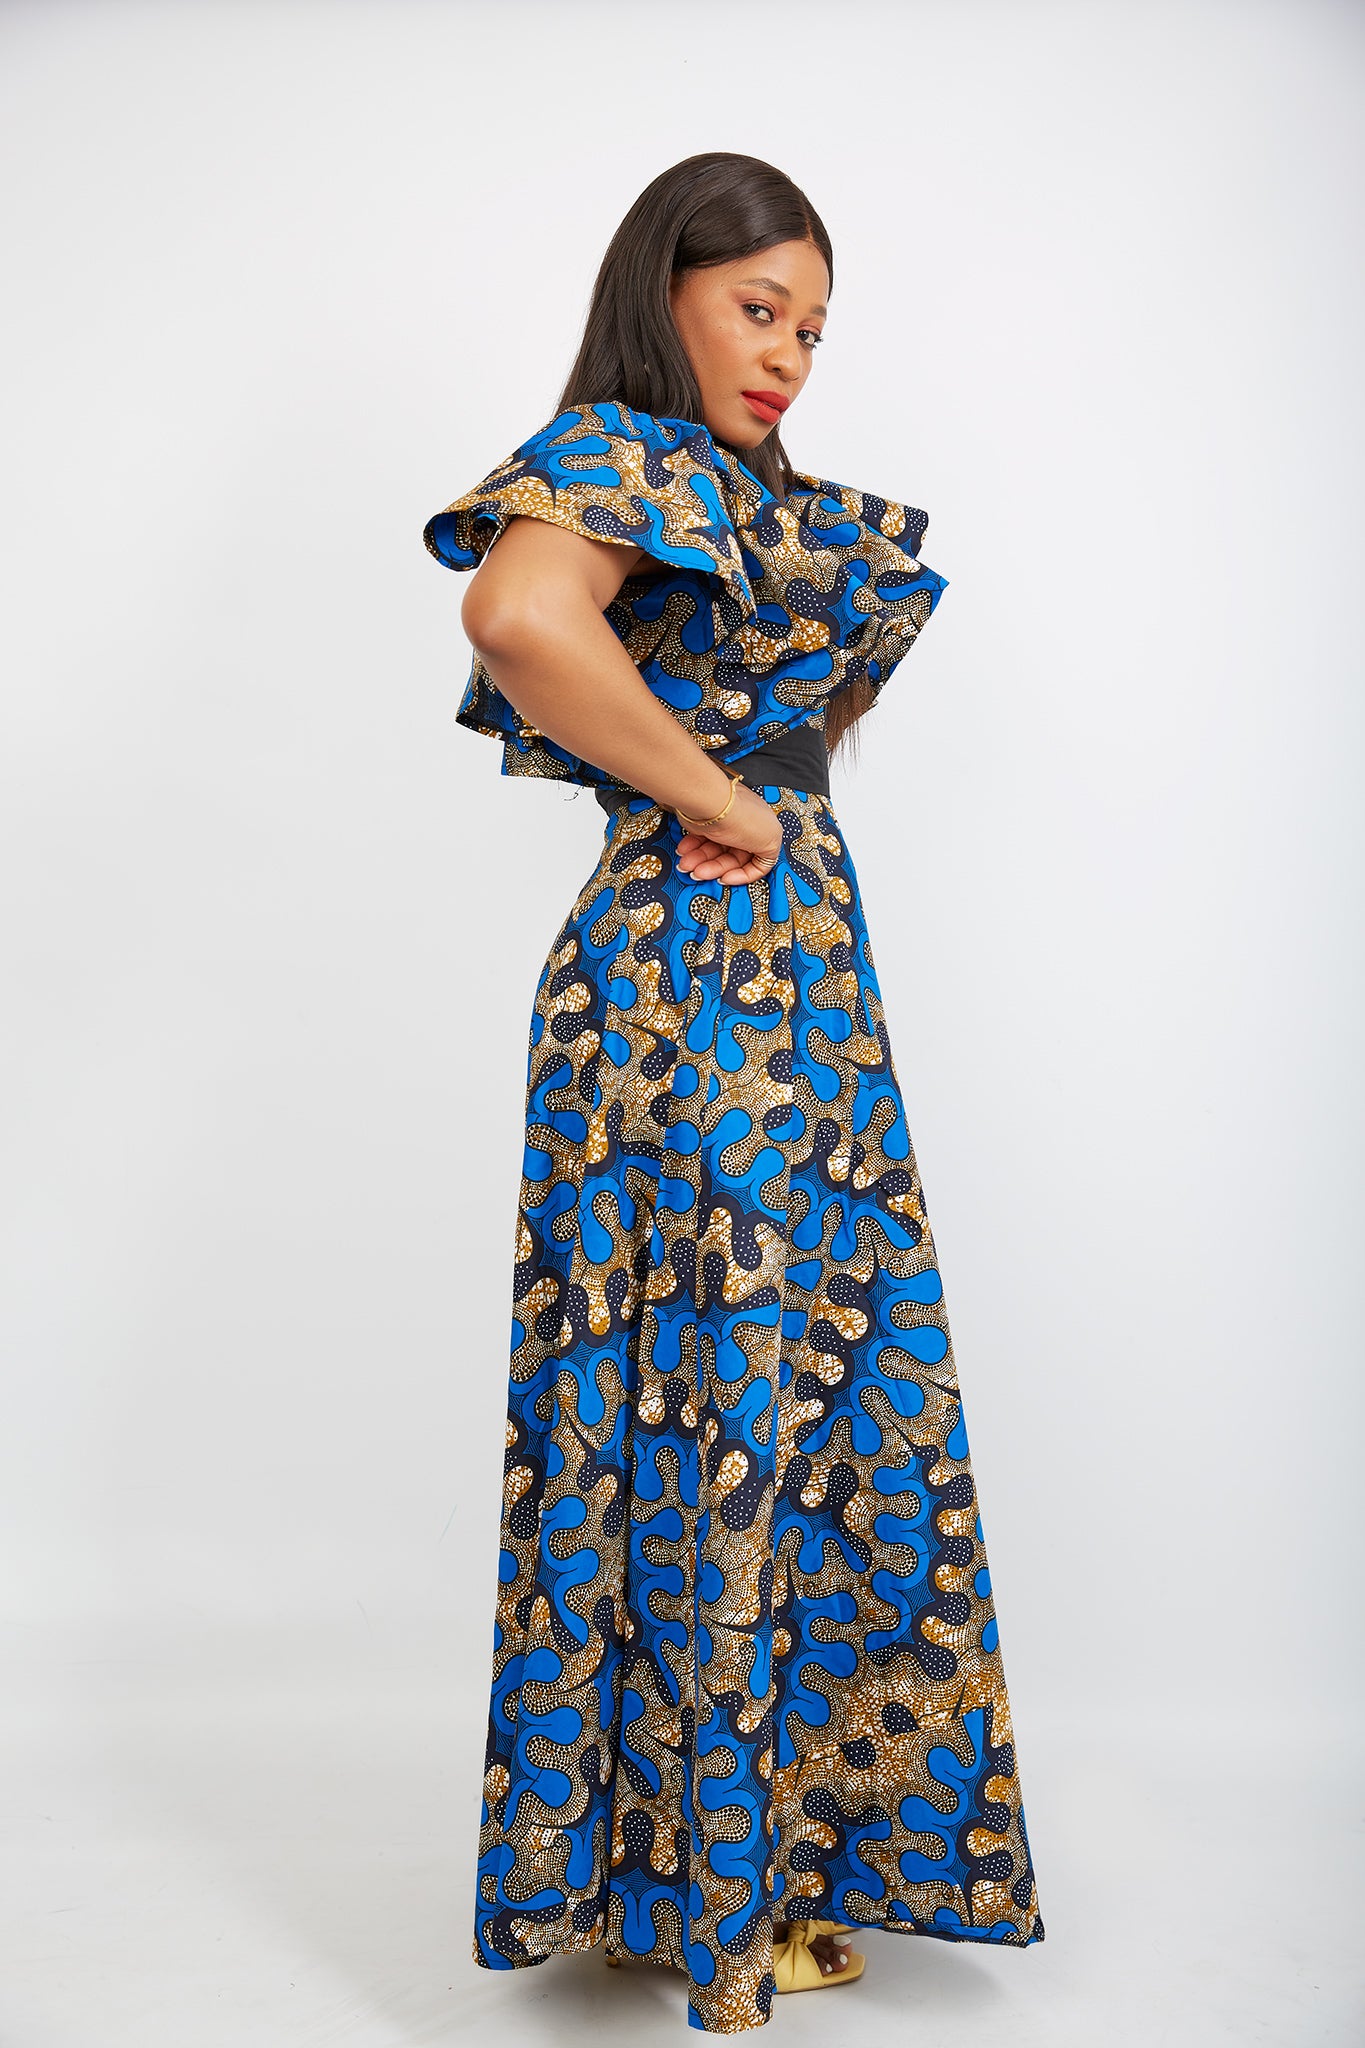 African dress for plus size women | African print clothing in the UK | Ready to wear African print outfits.